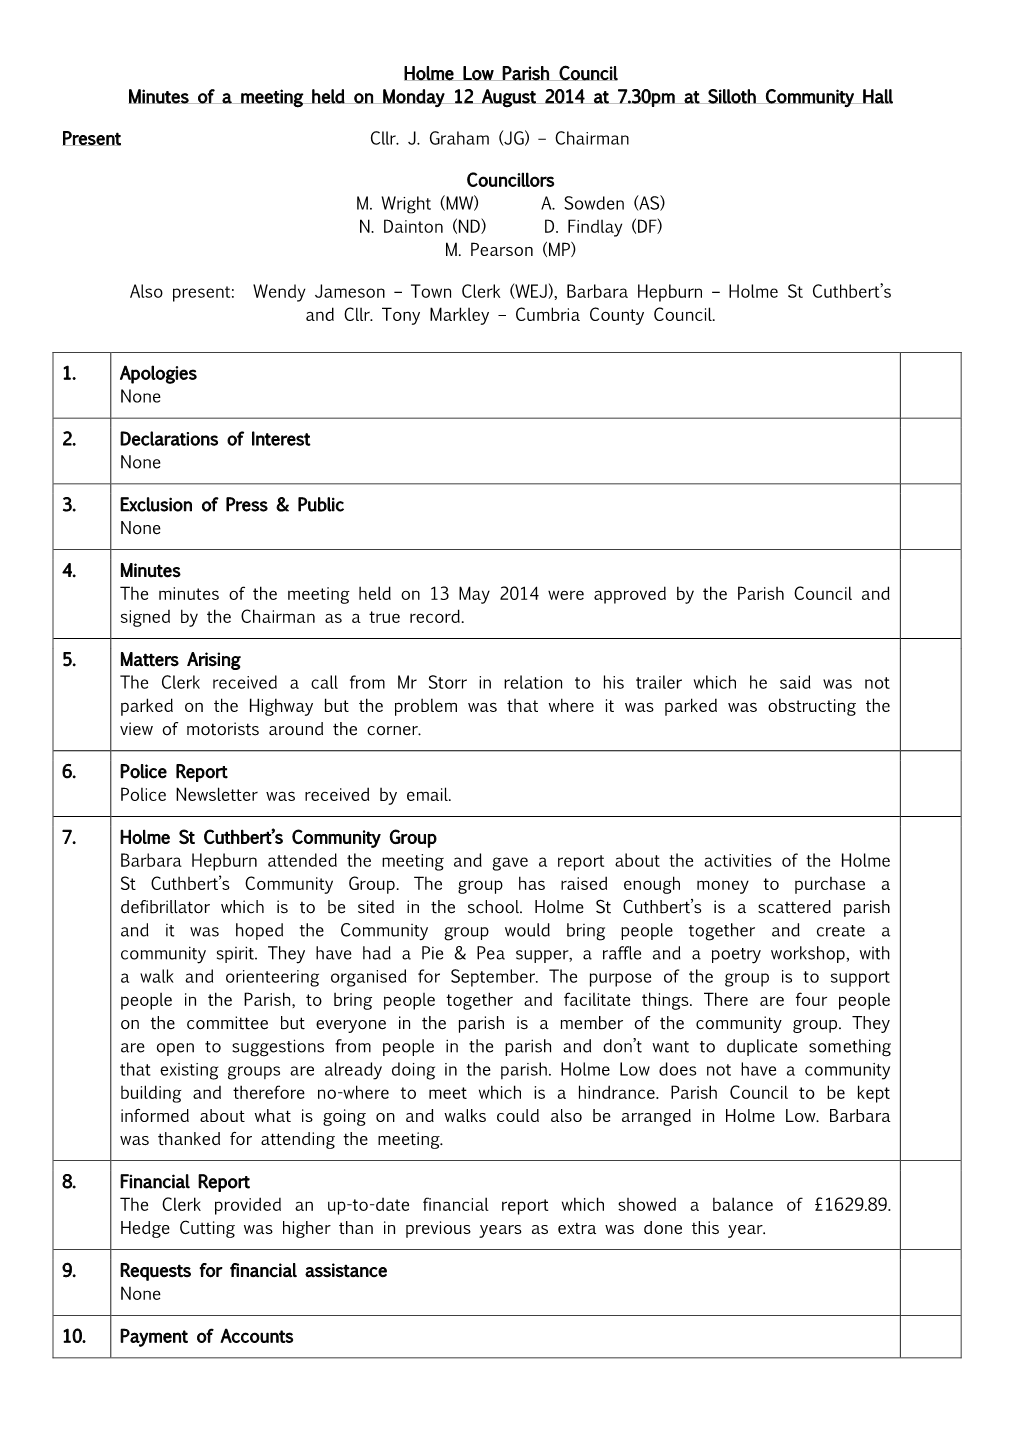 Holme Low Parish Council Minutes of a Meeting Held on Monday 12 August 2014 at 7.30Pm at Silloth Community Hall